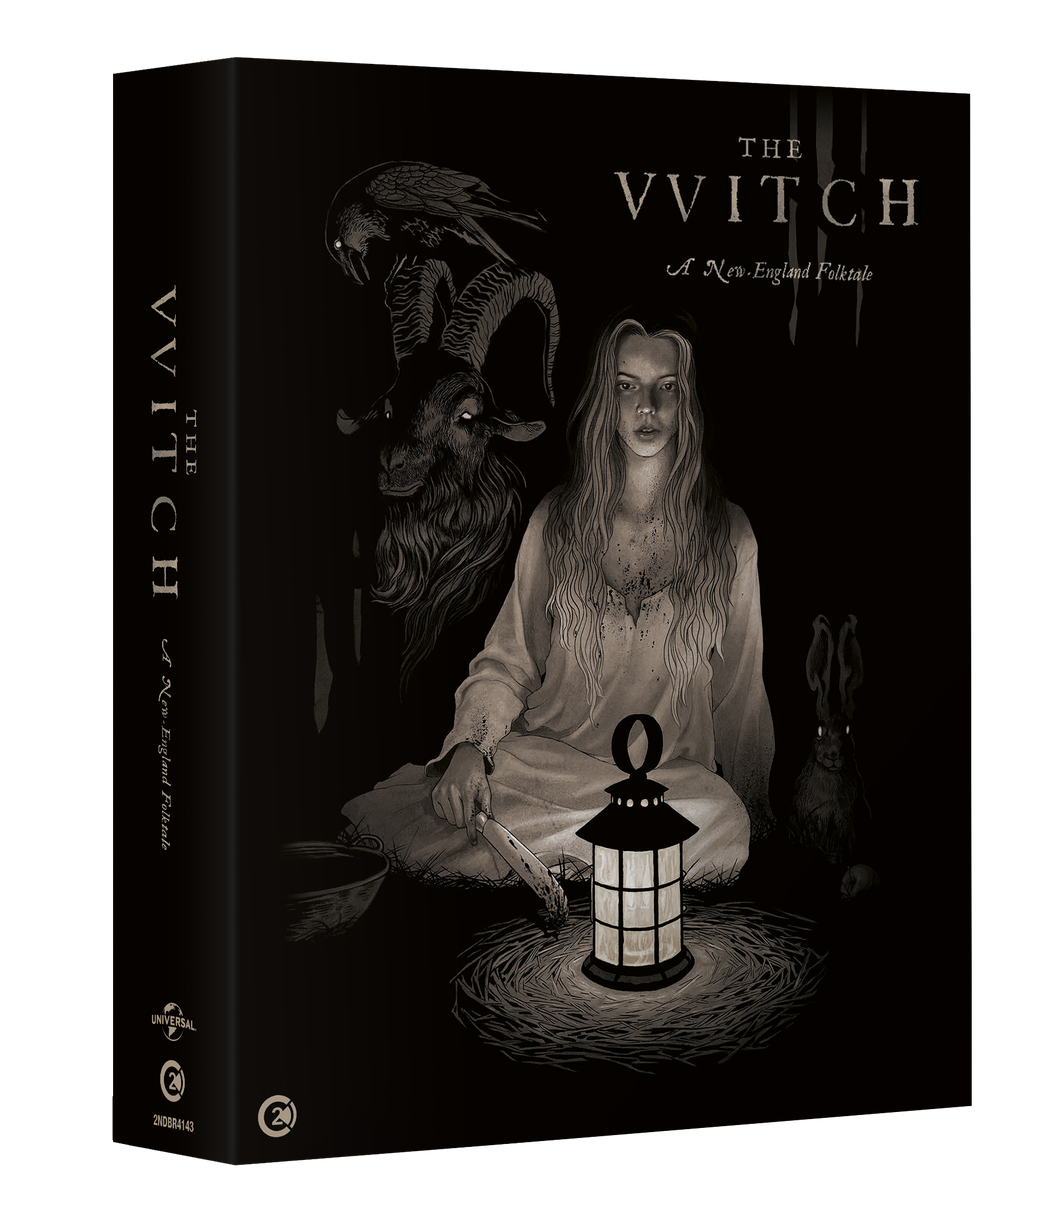 The Witch Limited Edition 4K UHD & Blu-ray - OUT OF PRINT